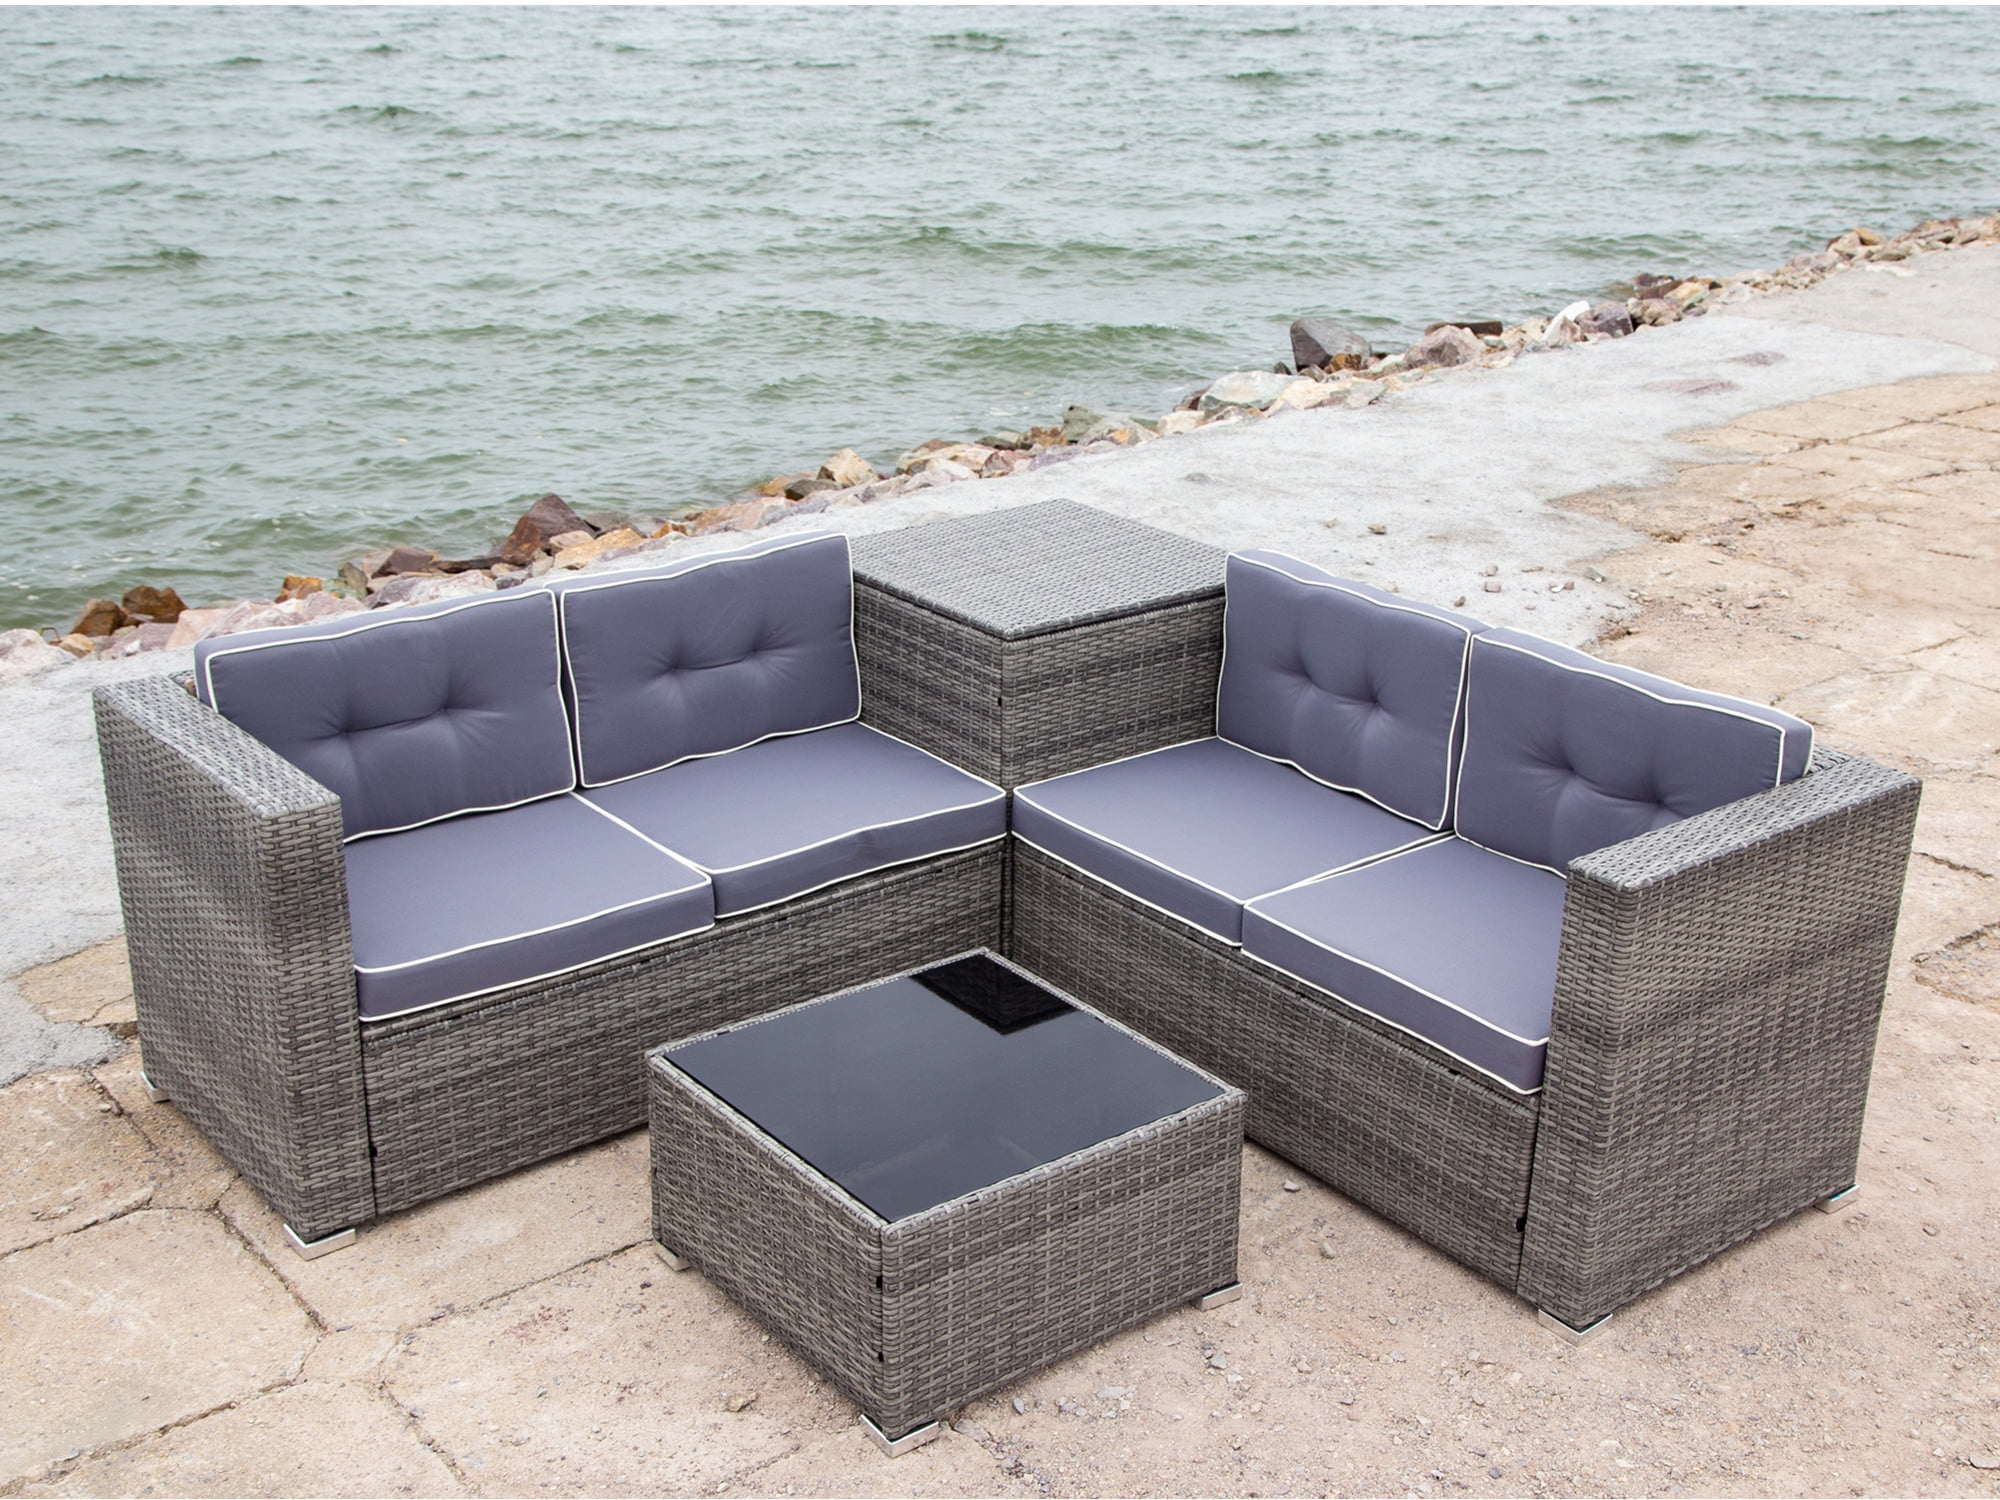 Gray Wicker Patio Furniture Sets on for Backyard, 2020 Upgrade New 4